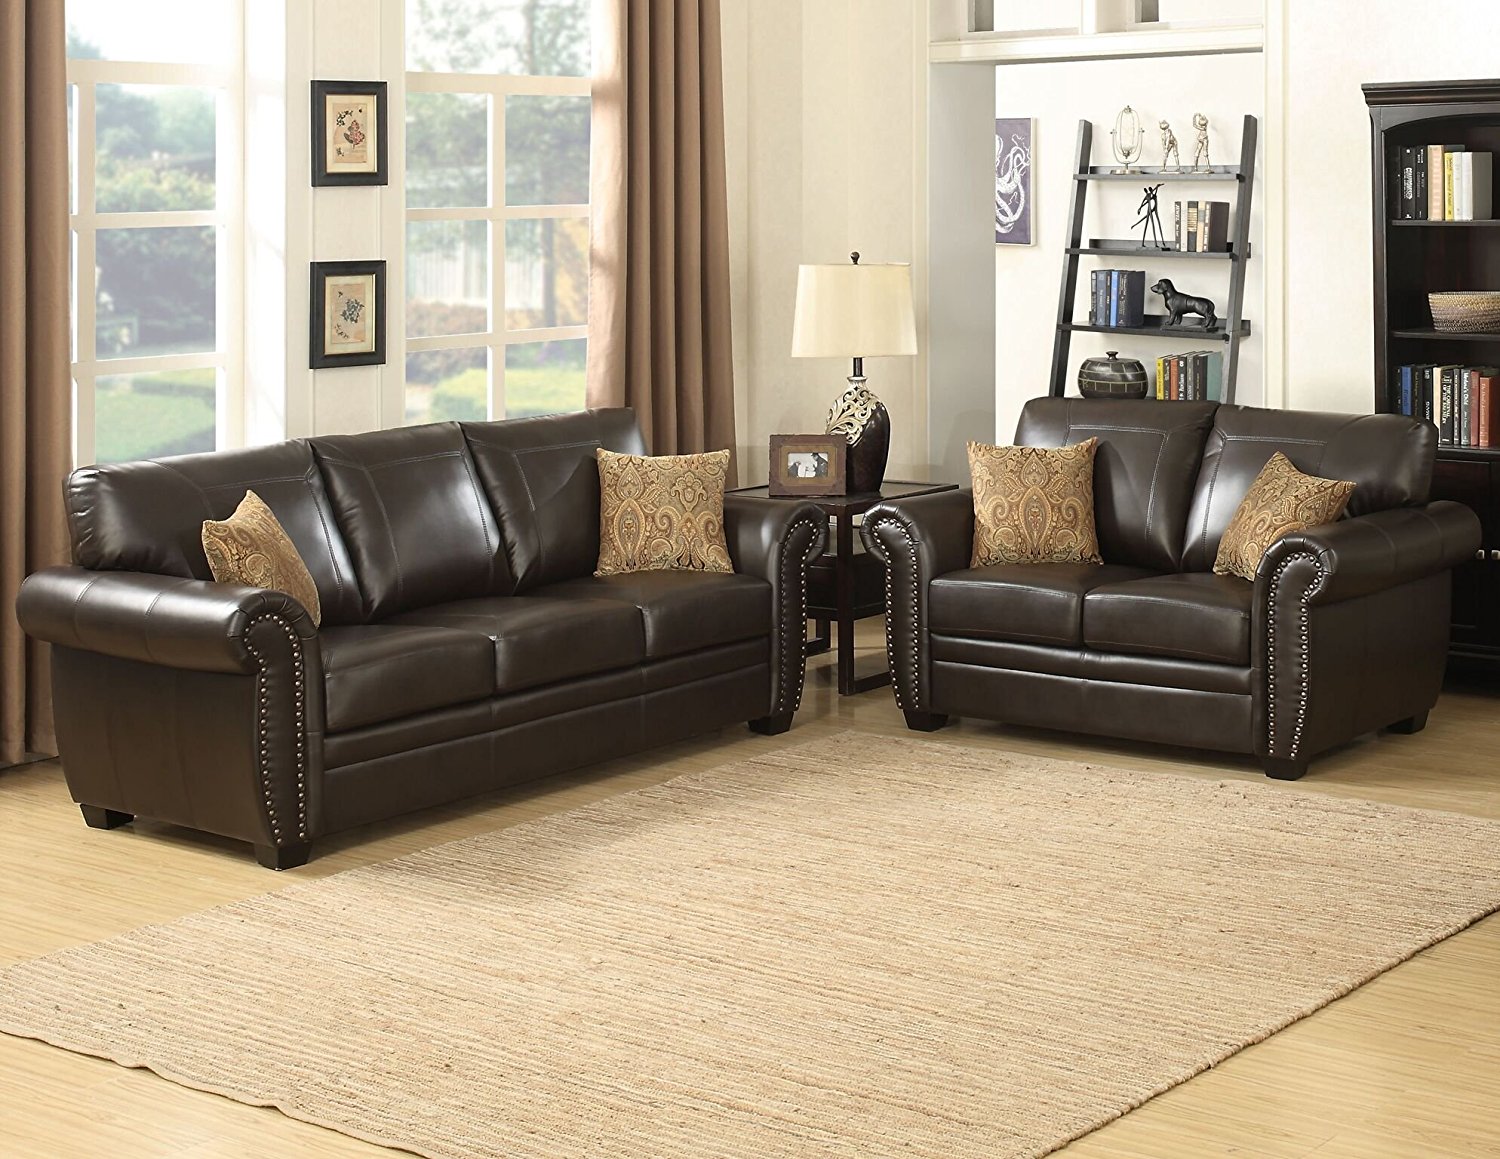 AC Pacific Louis Collection Traditional 2-Piece Upholstered Leather Living Room Set with Sofa, Loveseat and 4 Accent Pillows, Brown